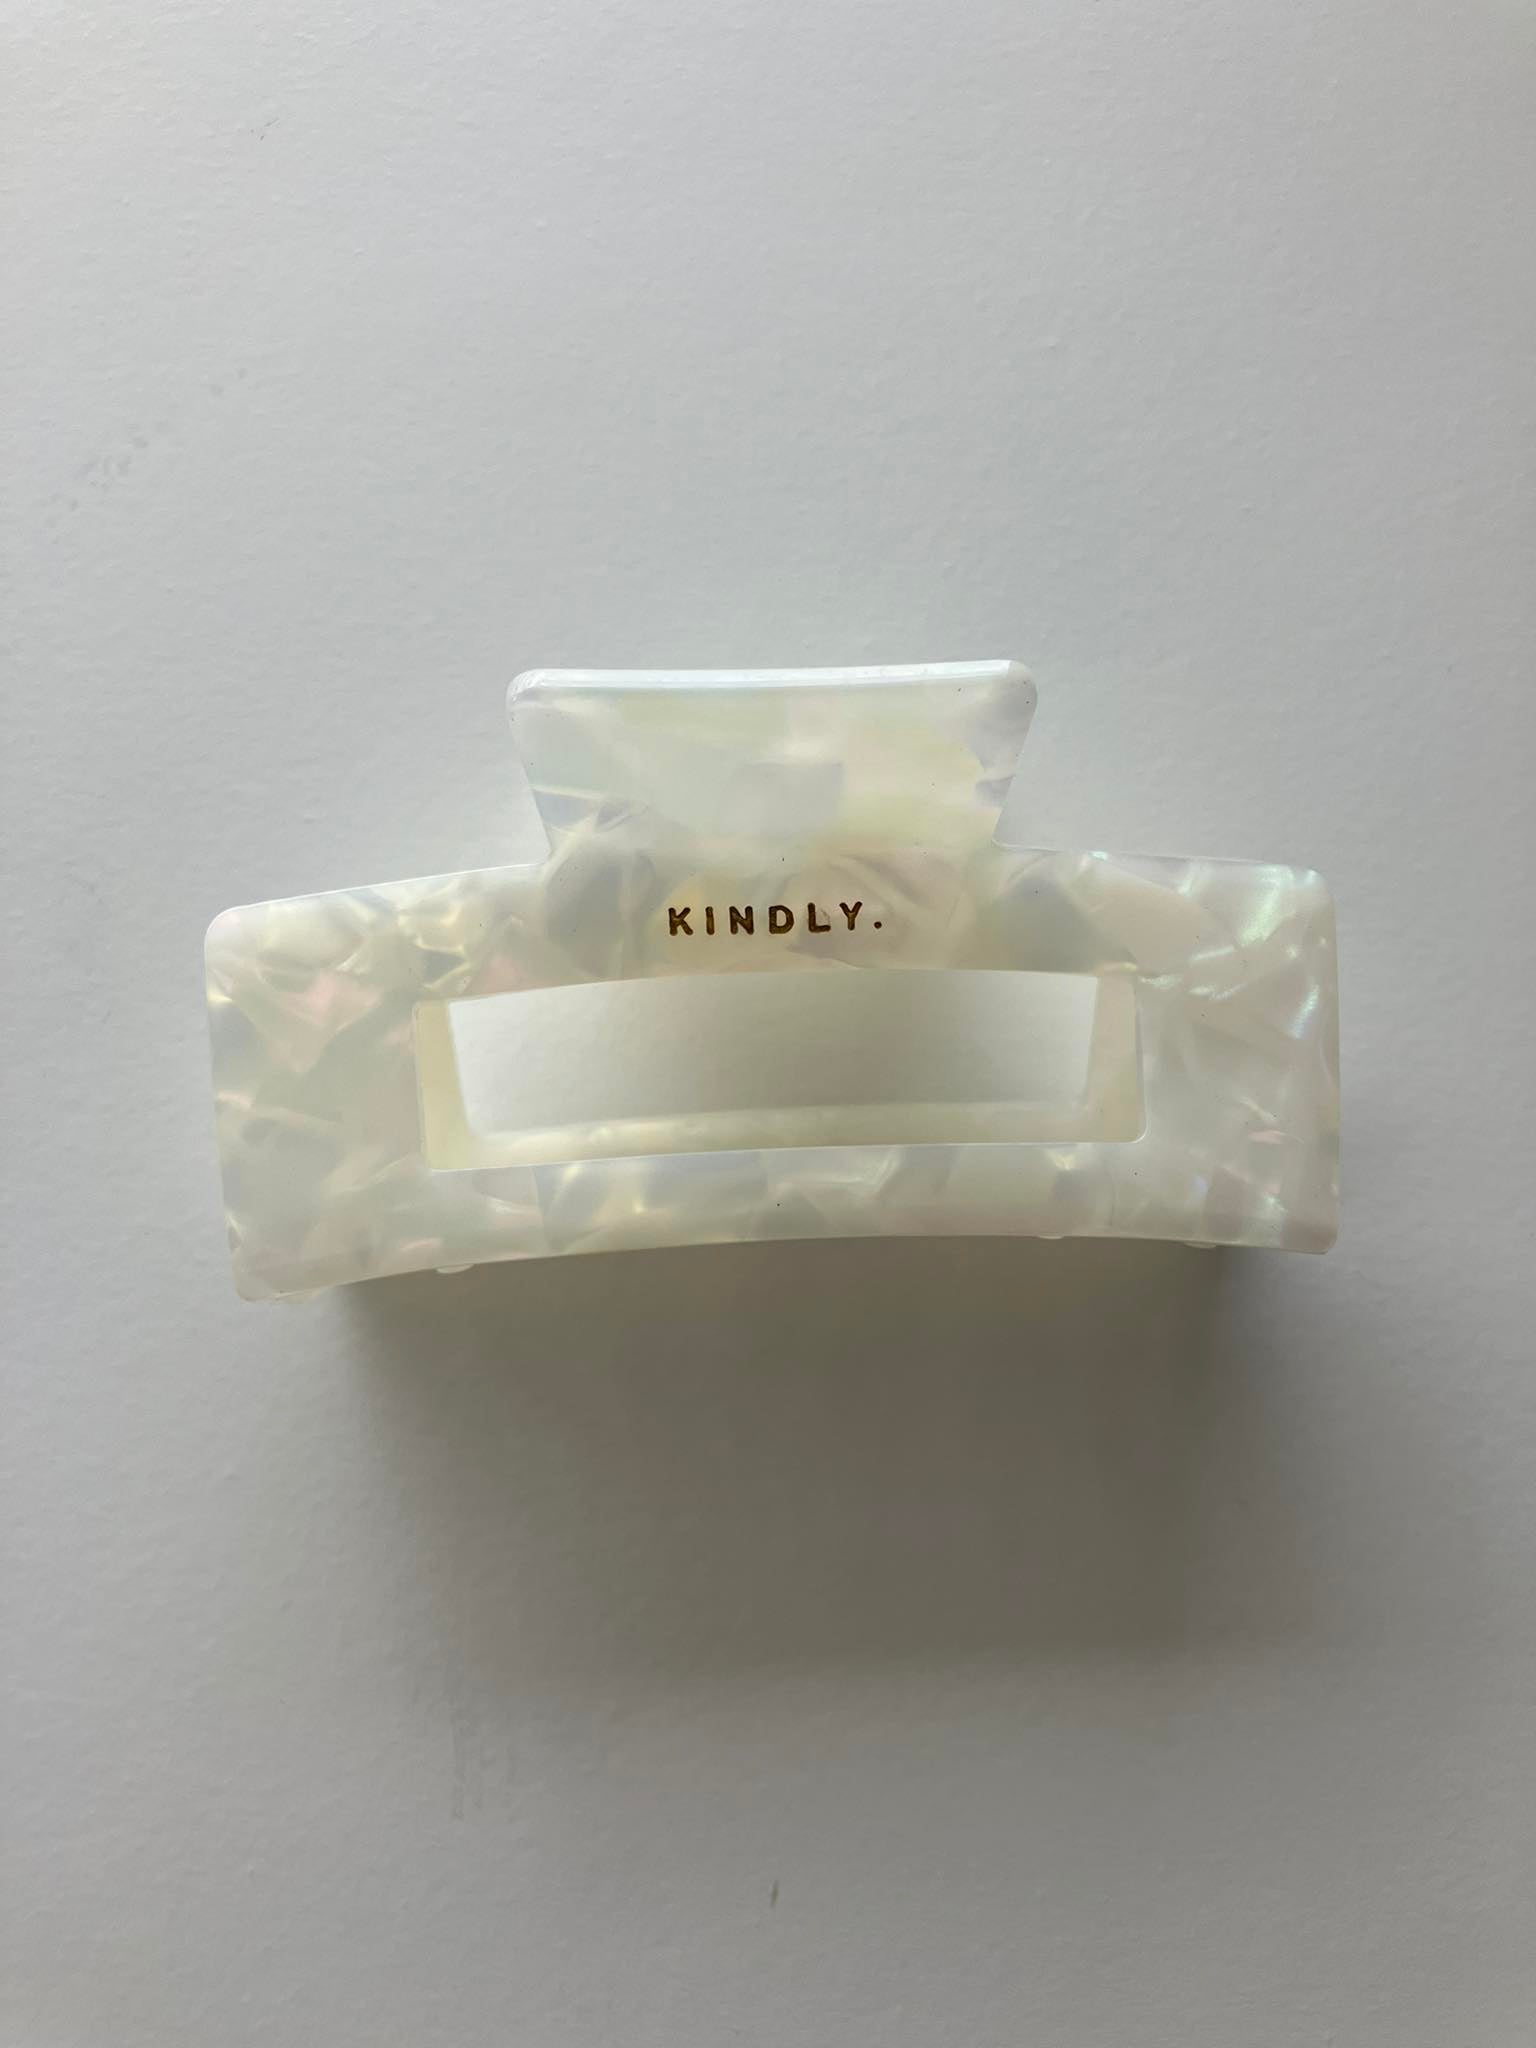 Hair Claw Clips - By Kindly The Label - Nz Brand - Exquisite Laser Clinic 